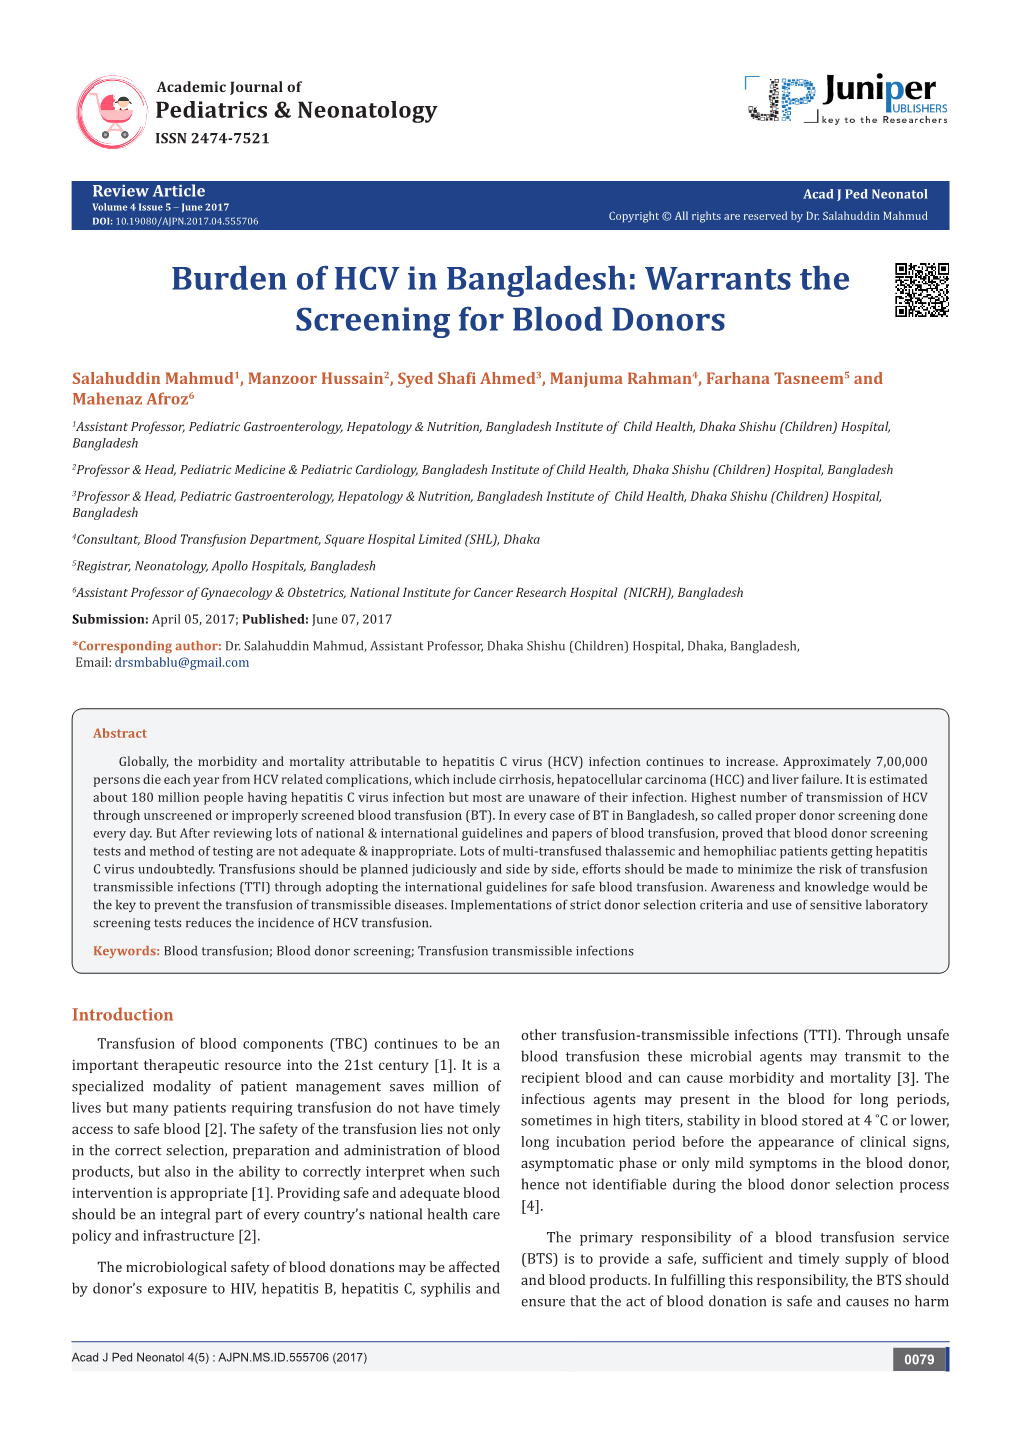 Burden of HCV in Bangladesh: Warrants the Screening for Blood Donors